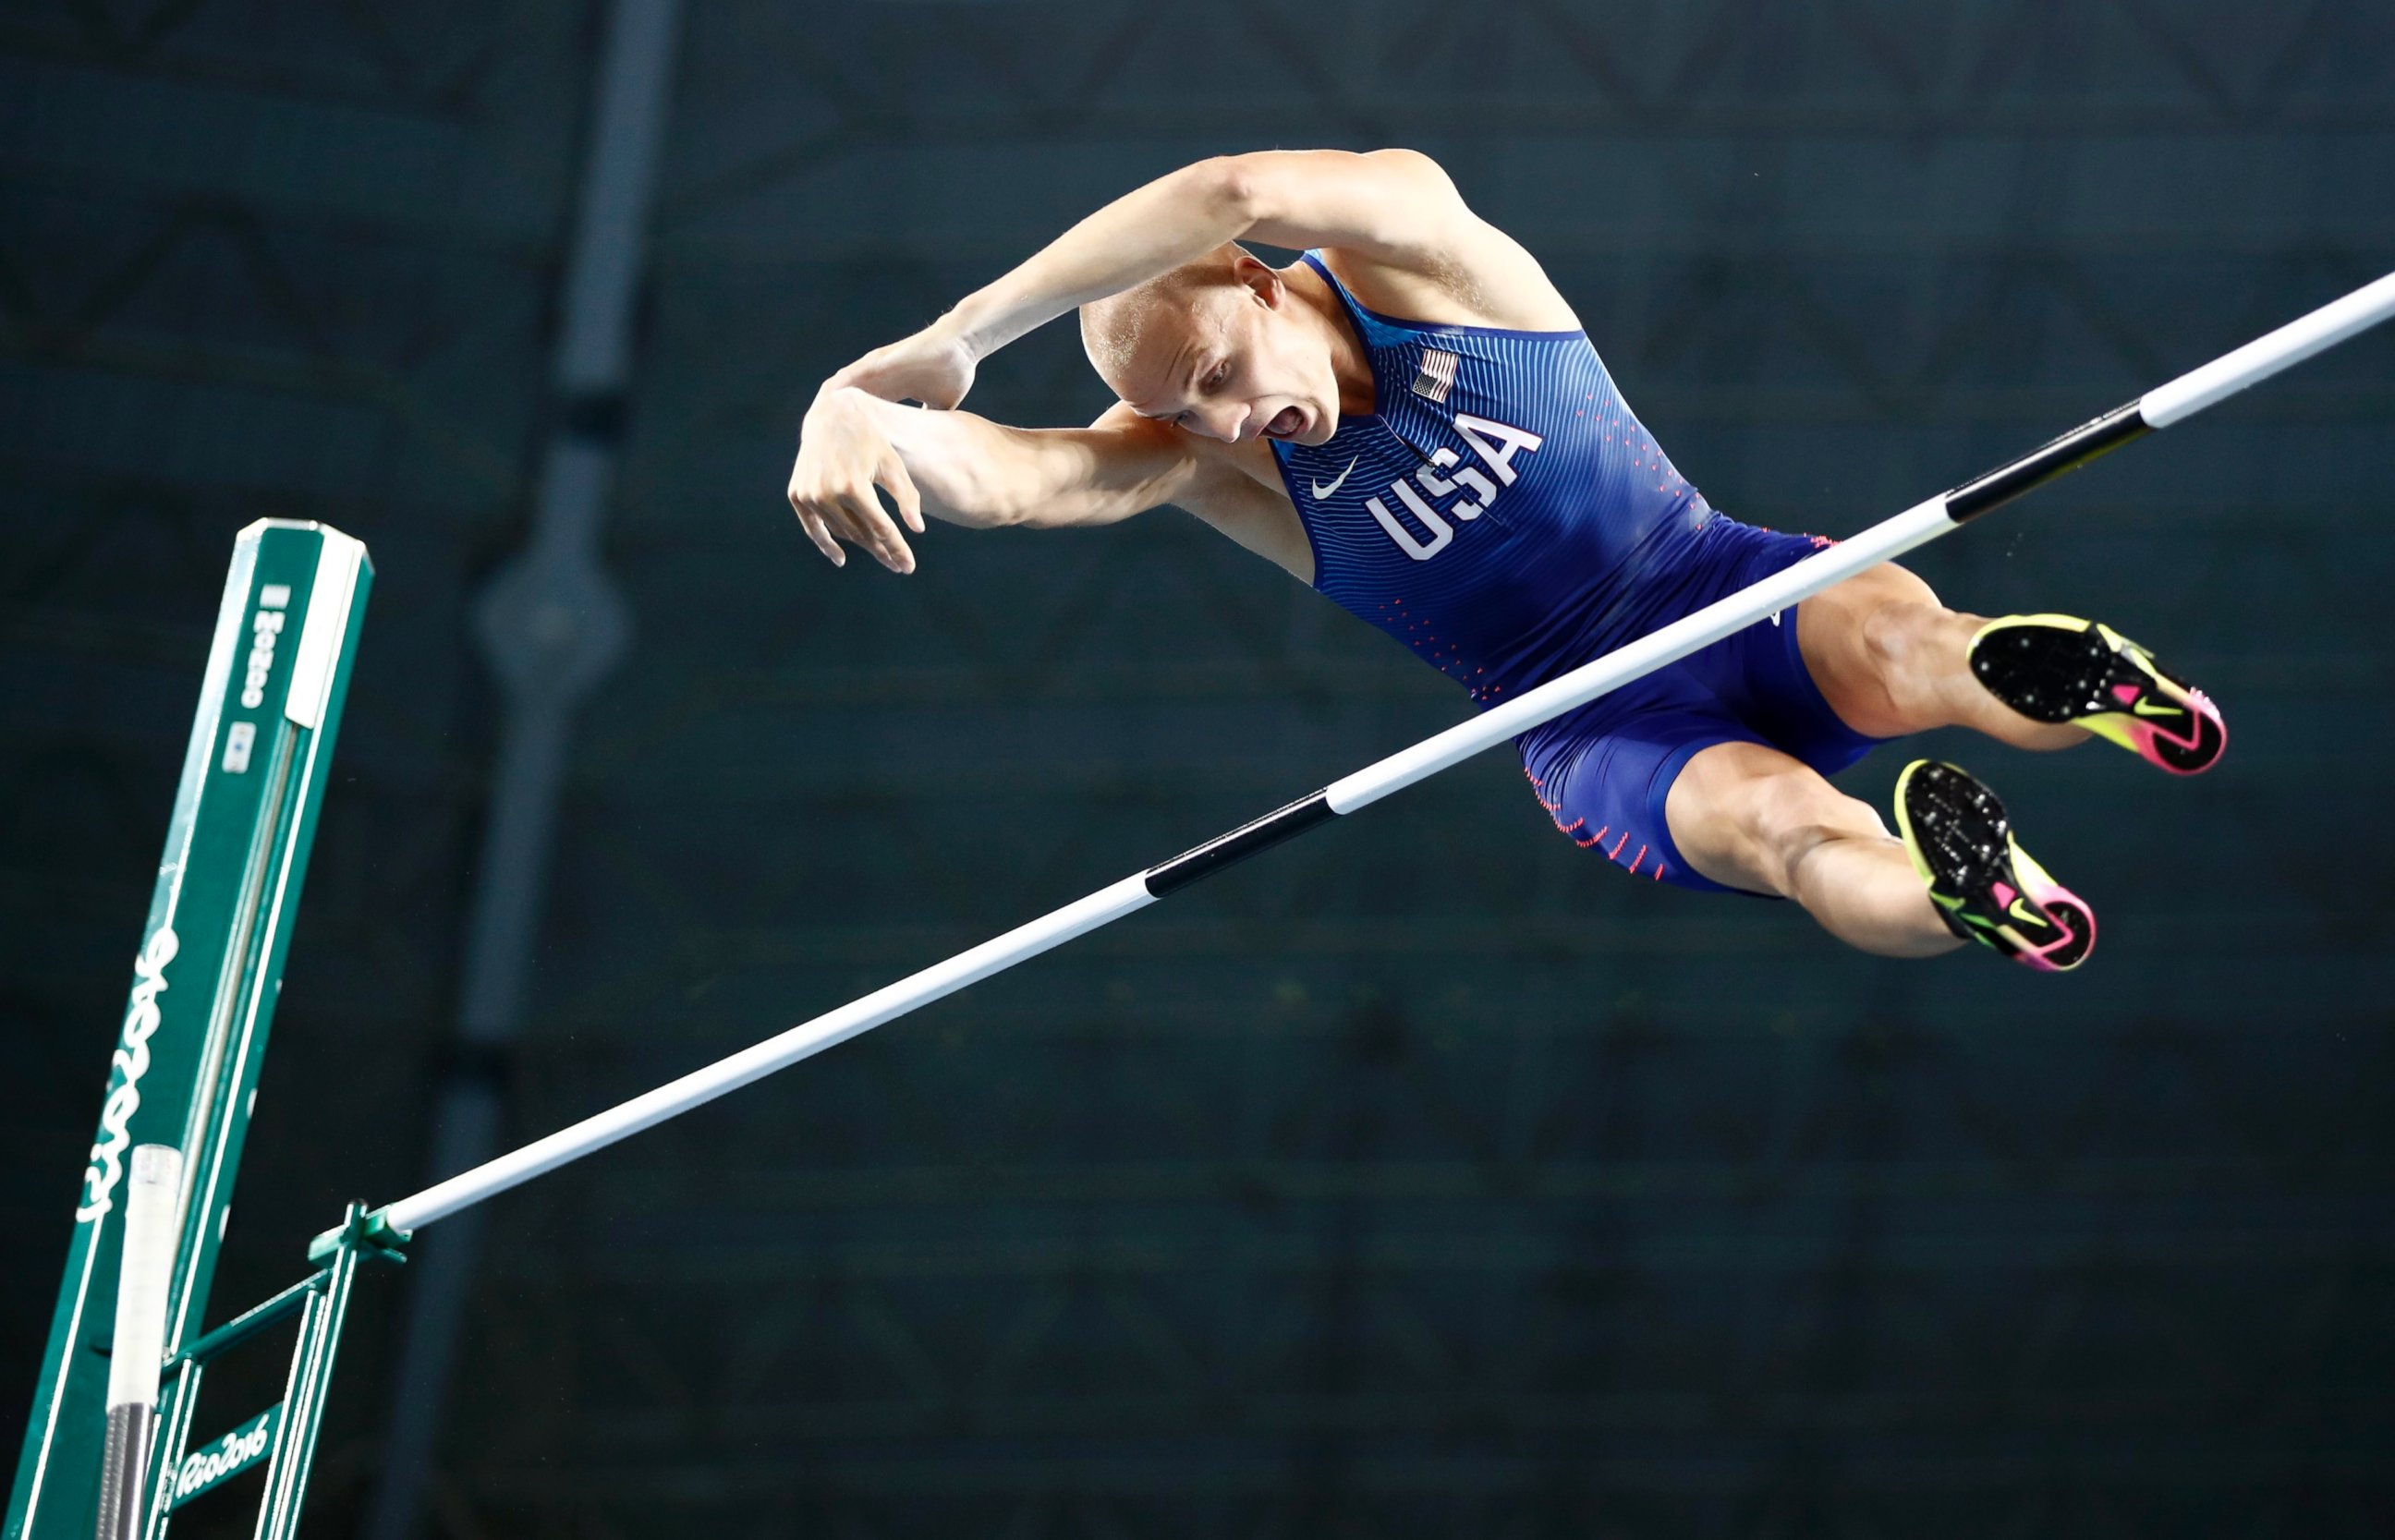 PHOTO: Sam Kendricks of the USA competes in the Men's Pole Vault final of the Rio 2016 Olympic Games Athletics, Track and Field events at the Olympic Stadium in Rio de Janeiro, Brazil, Aug. 15, 2016. 